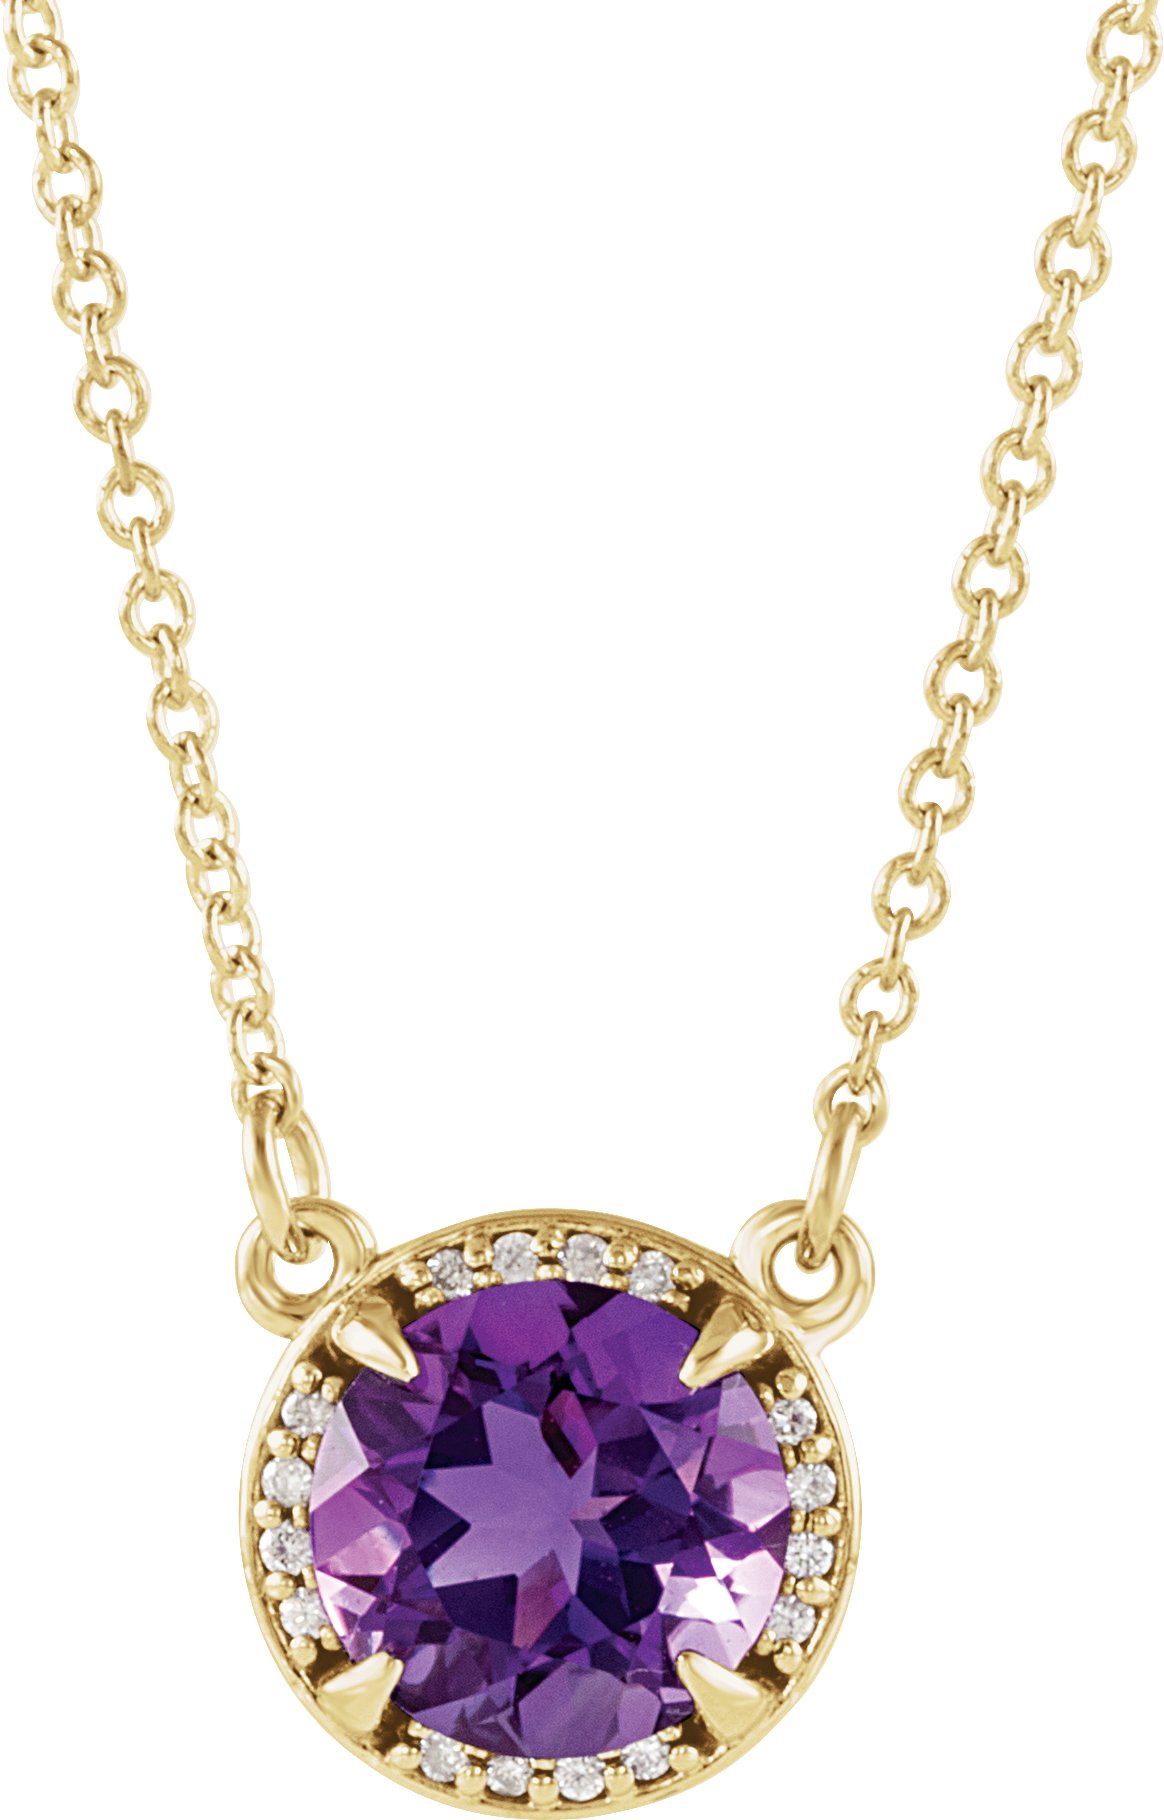 14K Yellow 6 mm Round Amethyst and .04 CTW Diamond 16 inch Necklace Ref 13127108